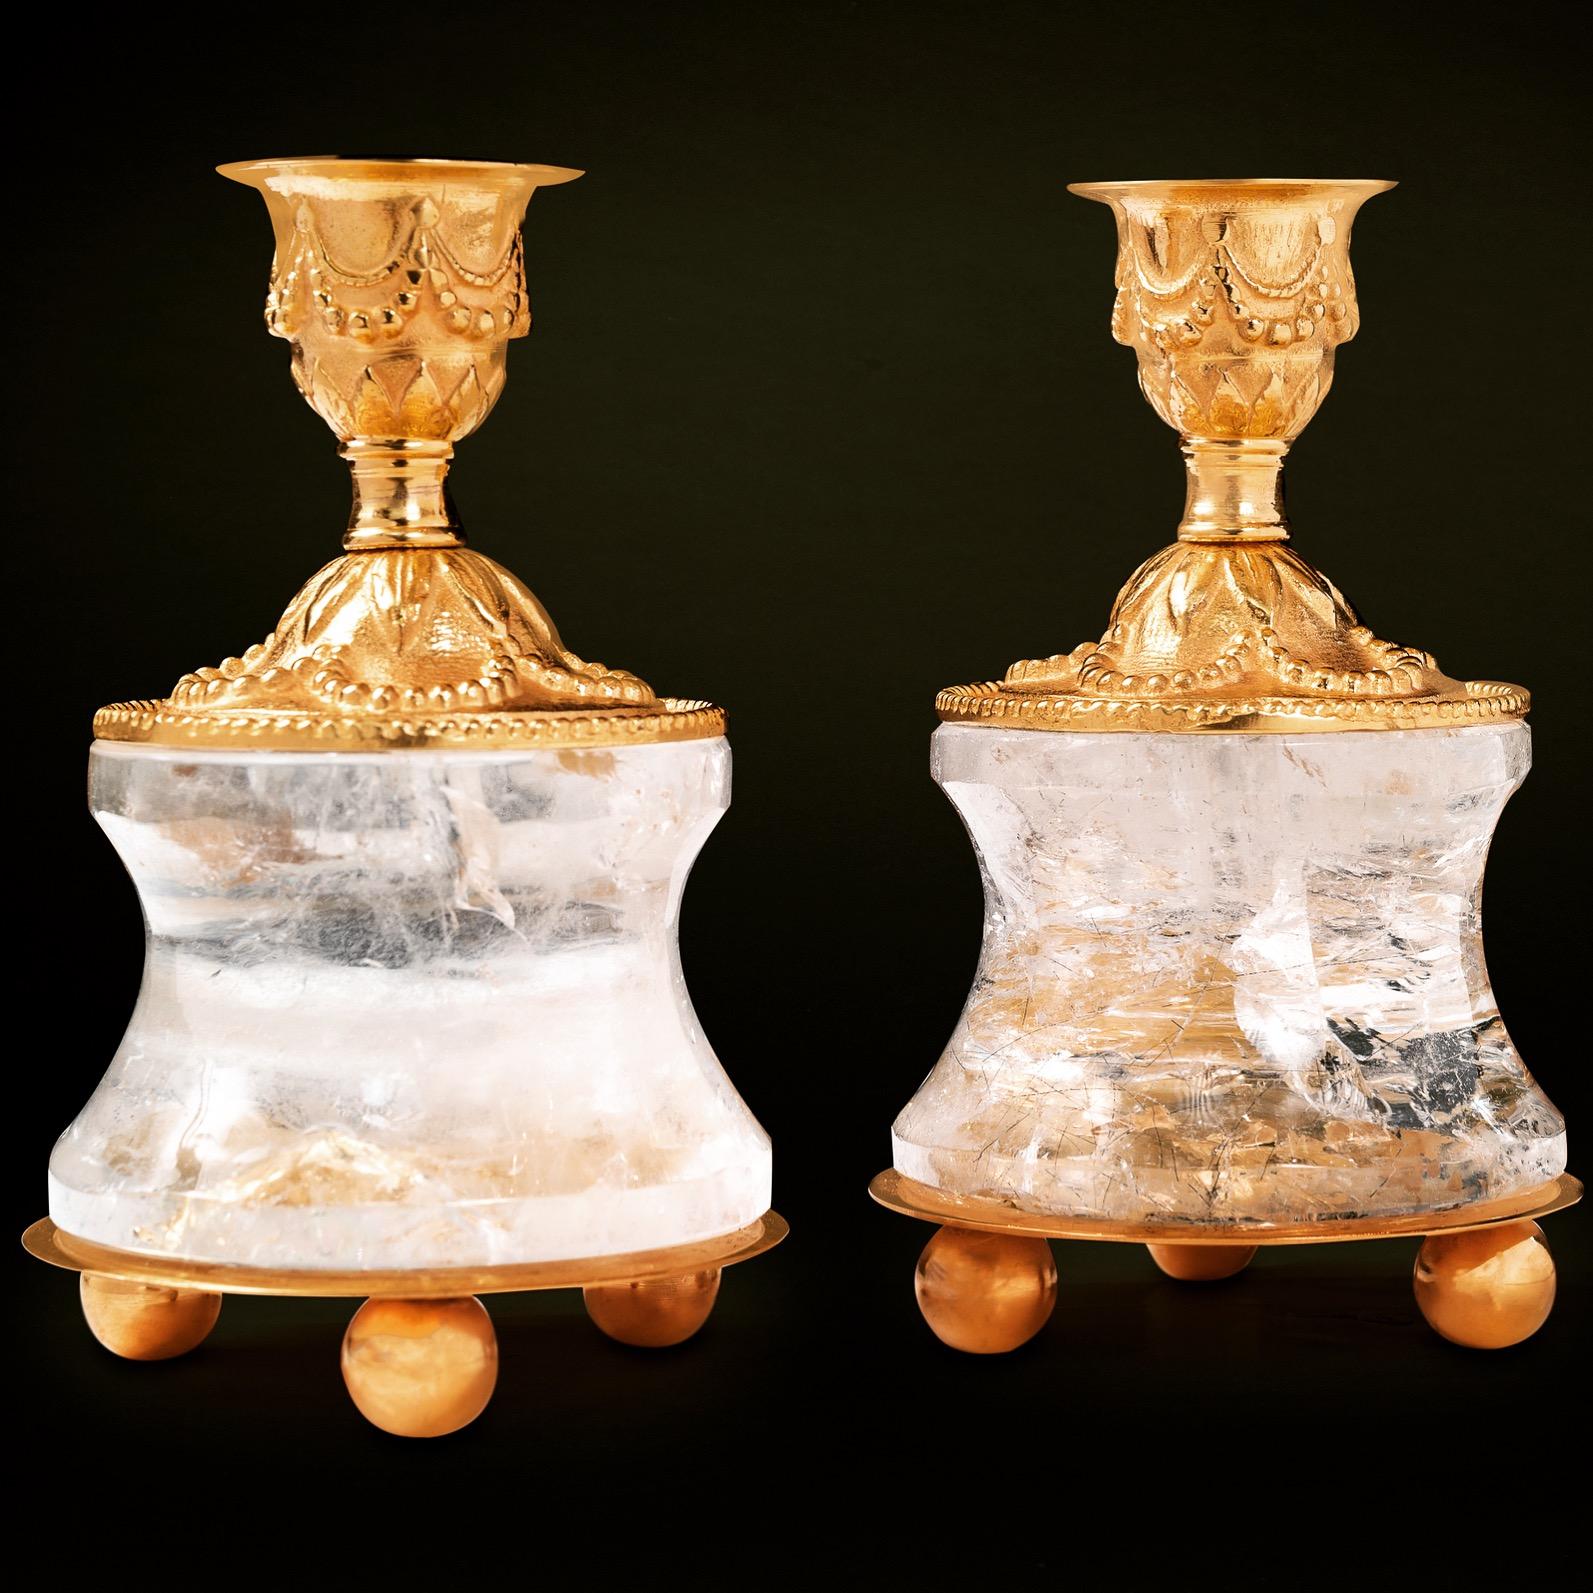 Contemporary Rock Crystal Louis the Xvith Style 24k Ormolu Gilding Bronze Lamps Blue Shades